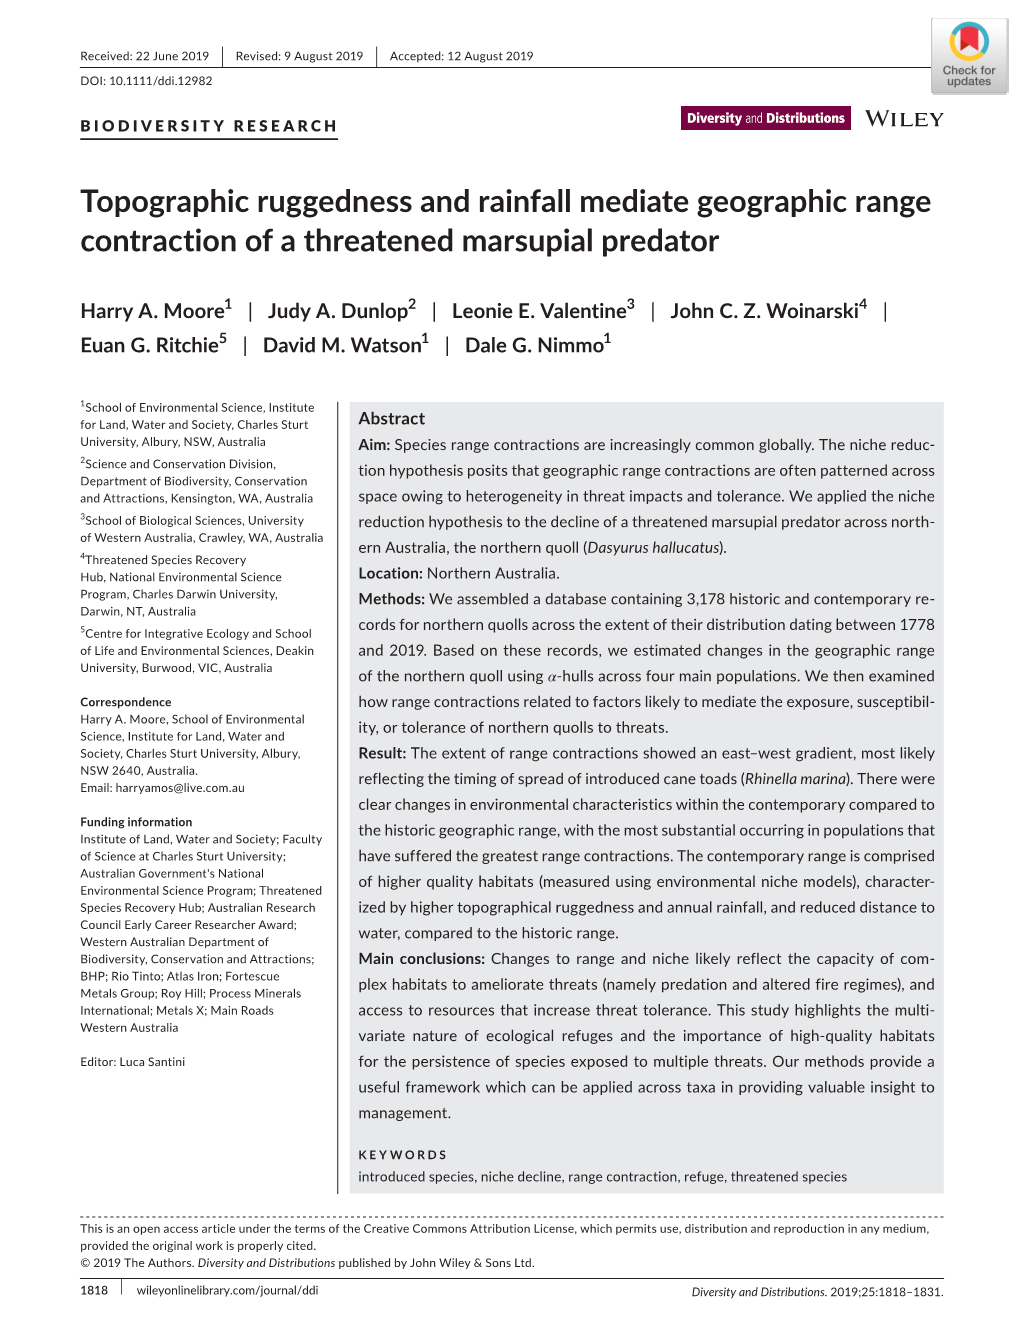 Topographic Ruggedness and Rainfall Mediate Geographic Range Contraction of a Threatened Marsupial Predator